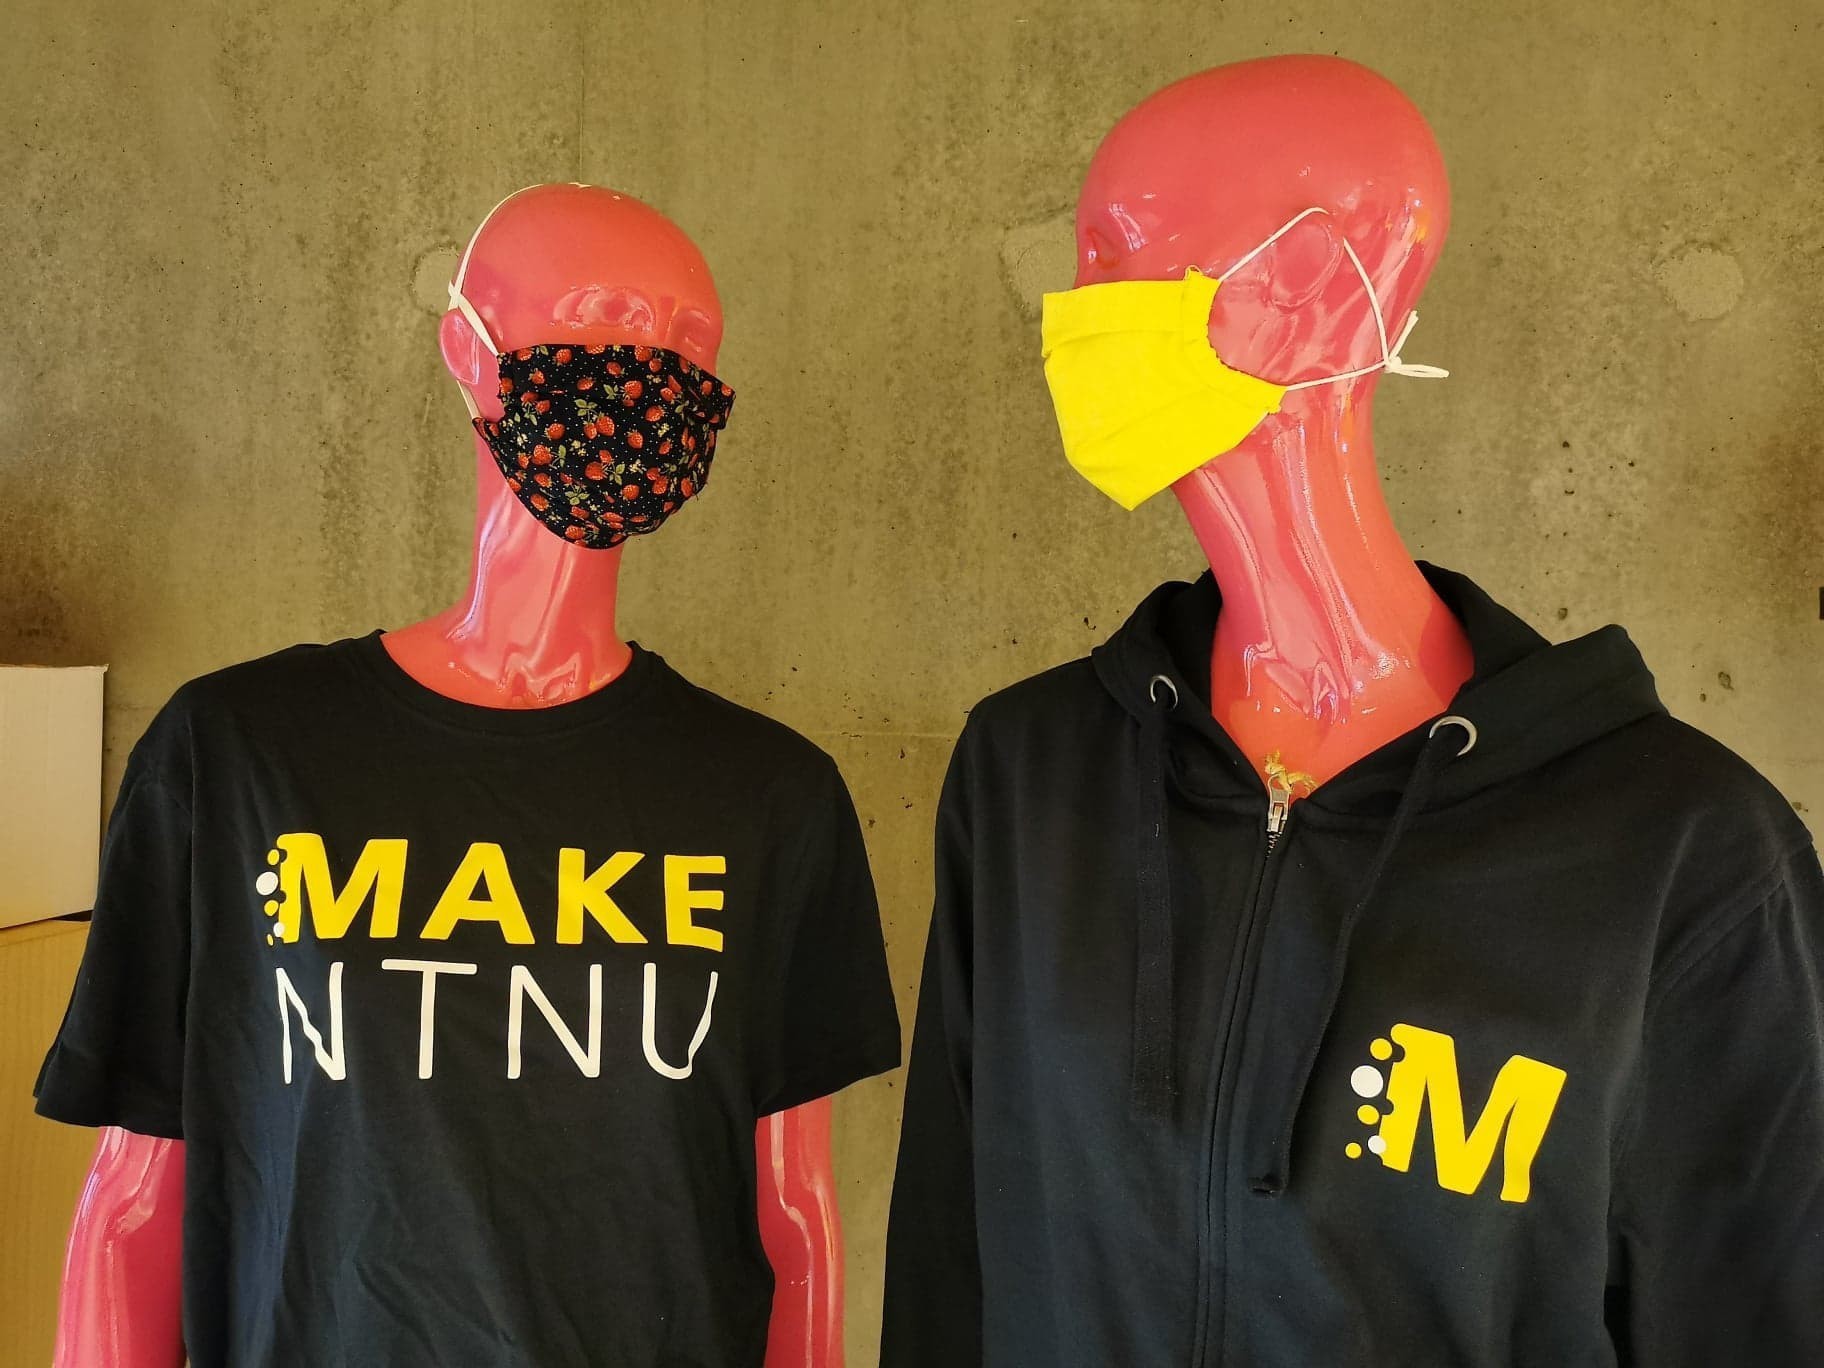 Two pink mannequins with MAKE NTNU apparel; the first one is wearing a black face mask with a strawberry pattern, and the second one is wearing a yellow face mask